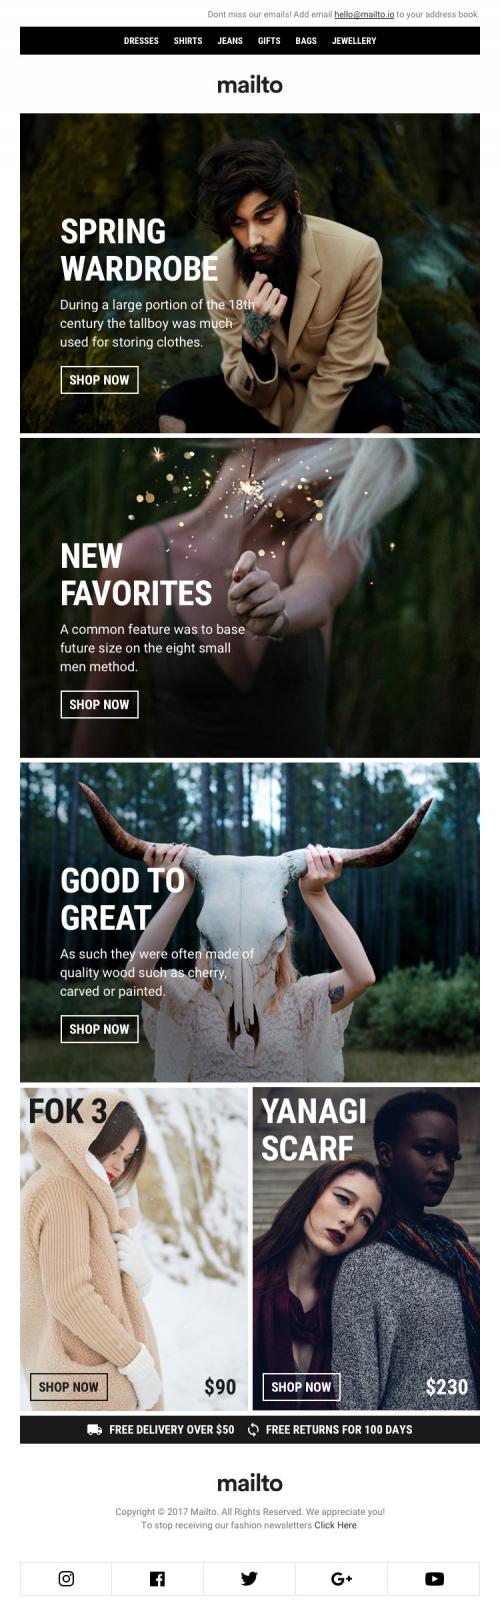 Email Template for Fashion Newsletter - email-template-for-fashion-newsletter